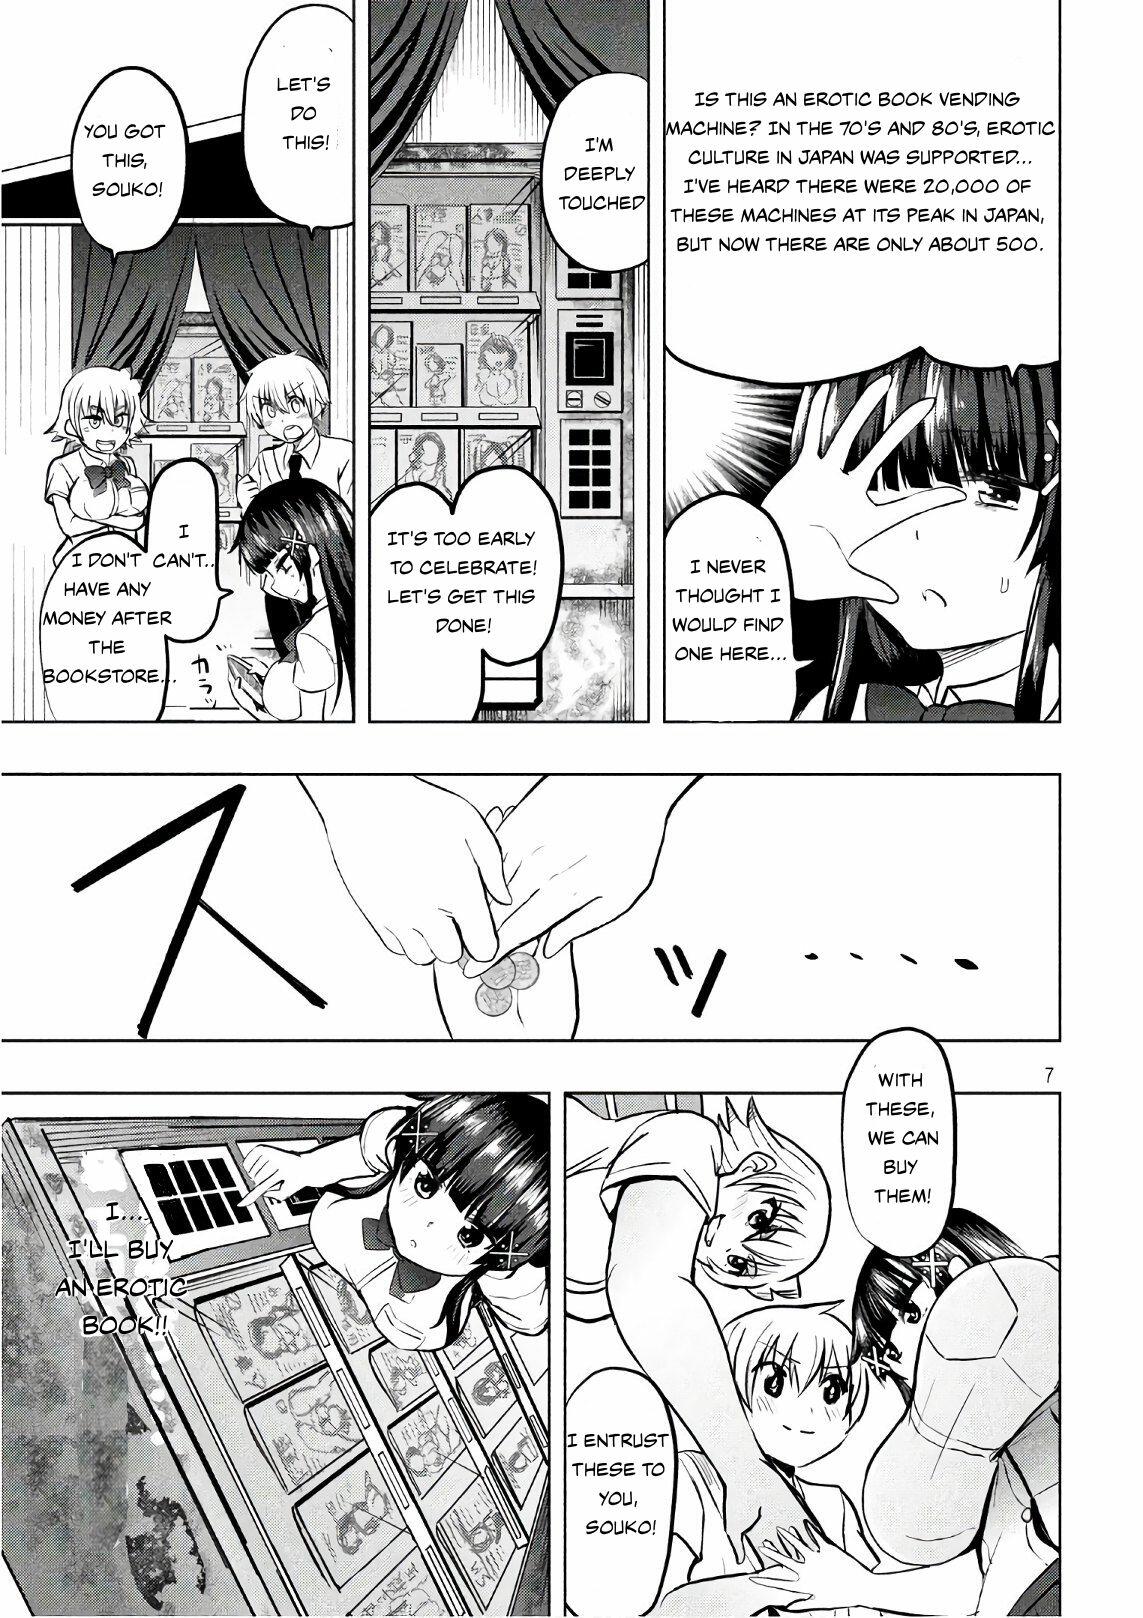 A Girl Who Is Very Well-Informed About Weird Knowledge, Takayukashiki Souko-San Chapter 25: Erotic Book page 7 - Mangakakalots.com